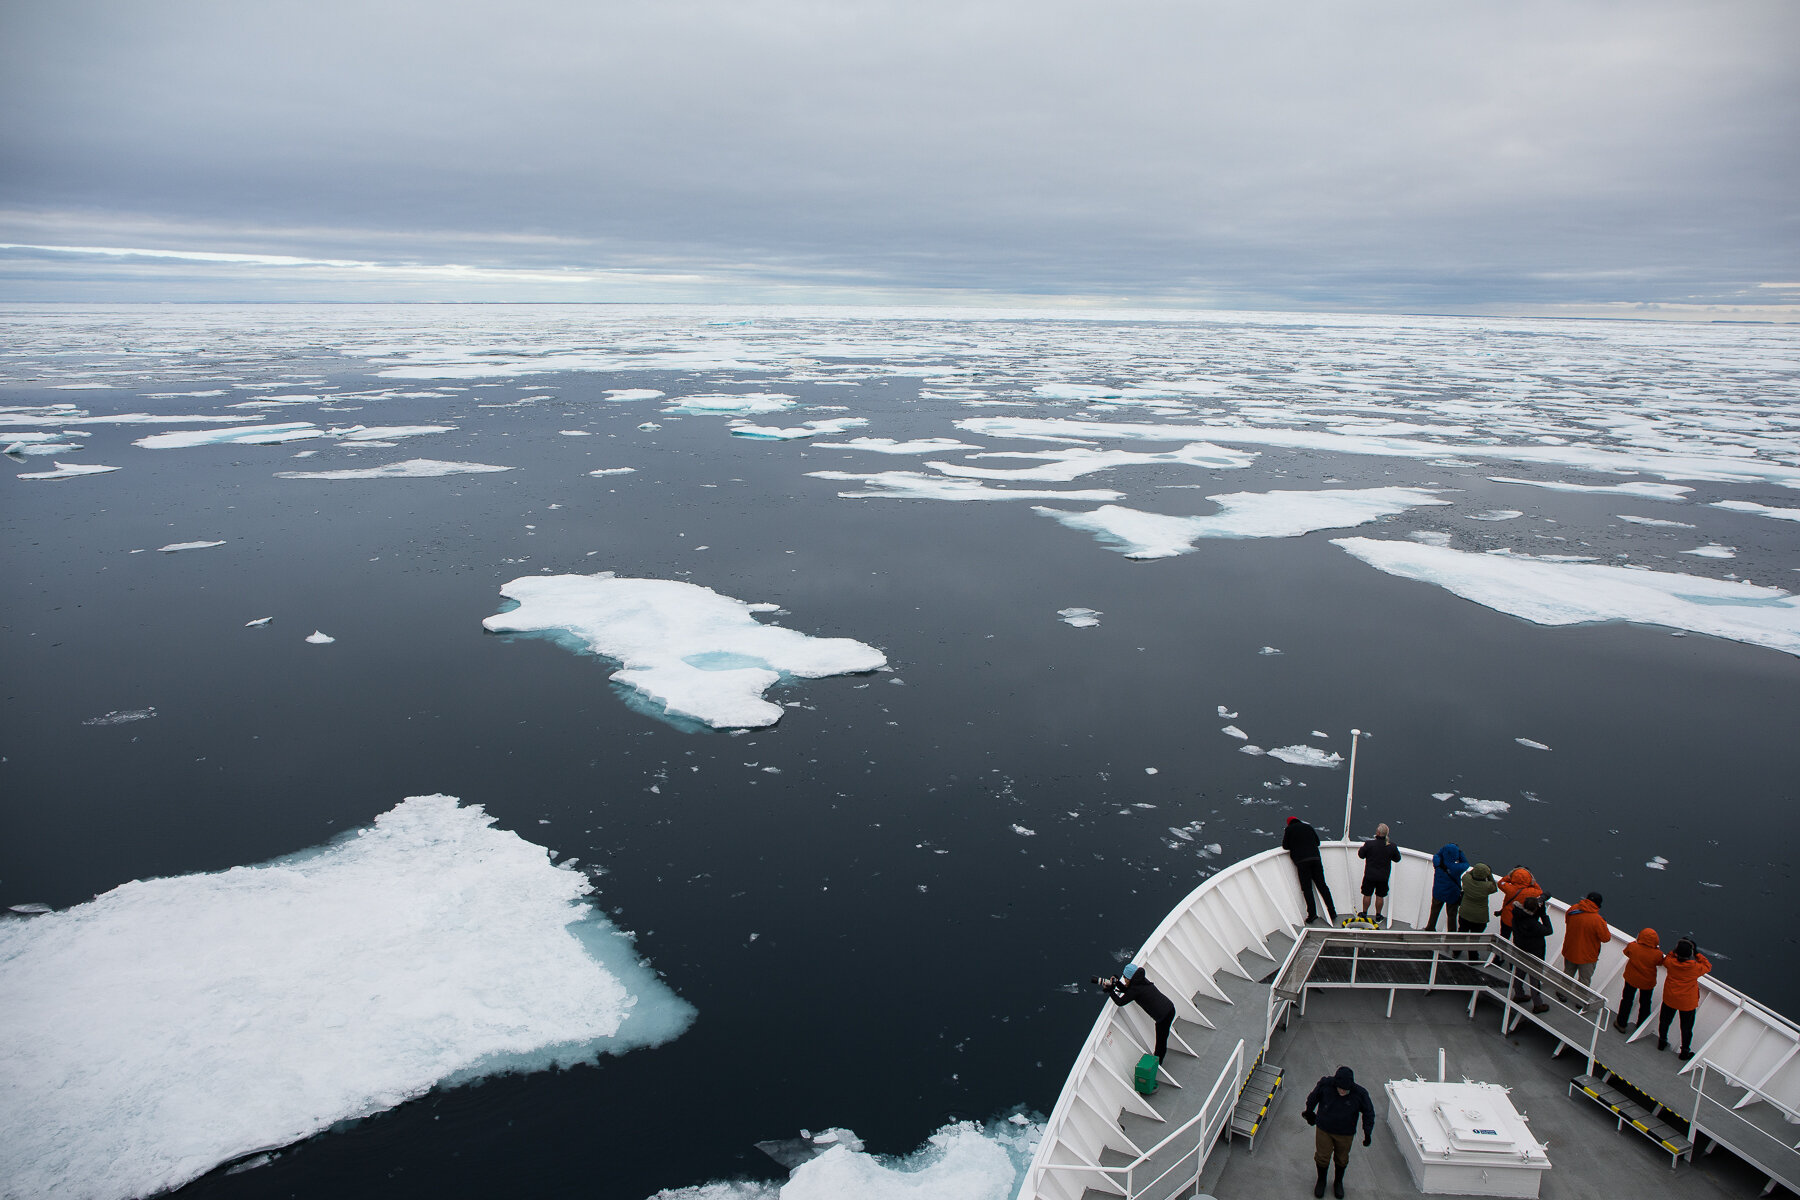  Canadian High Arctic - National Geographic Explorer’s first contact with sea ice 